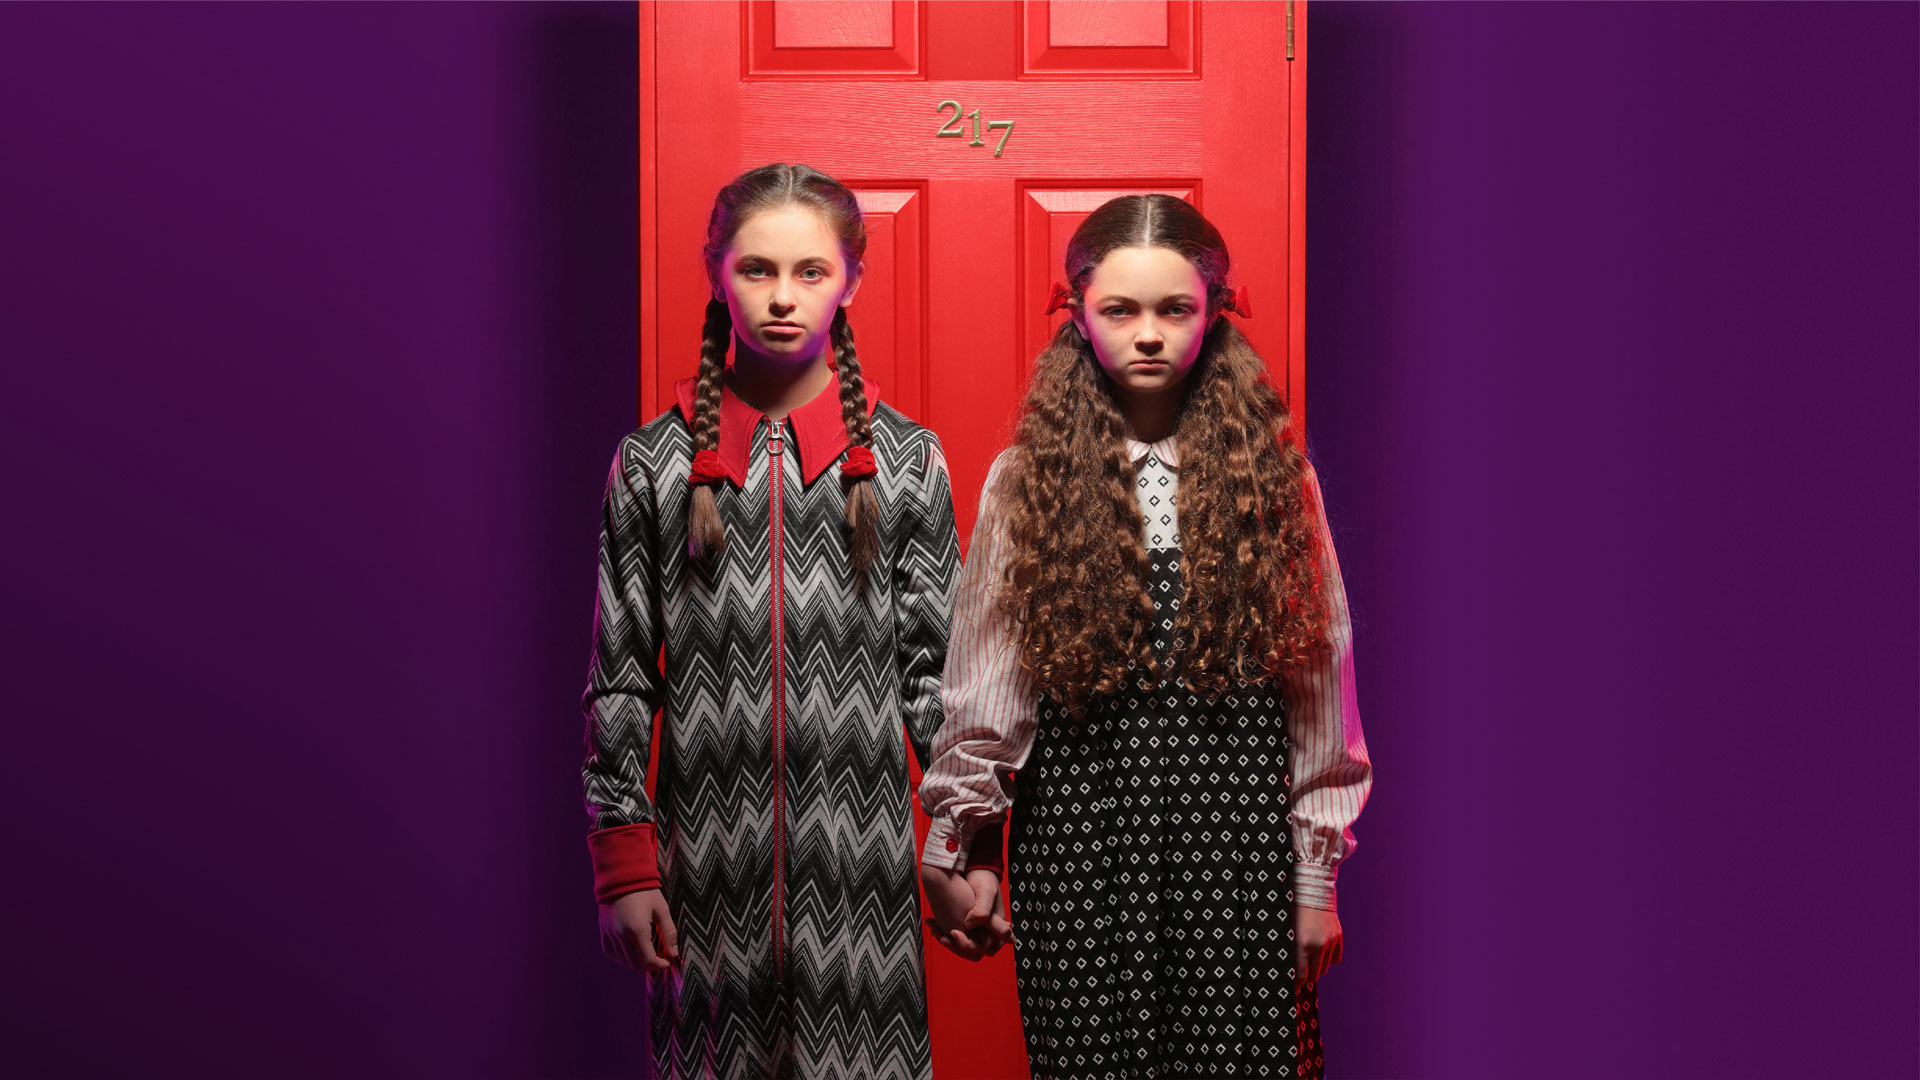 Two grim sisters stand hand in hand in front of a bright red door labeled 217.